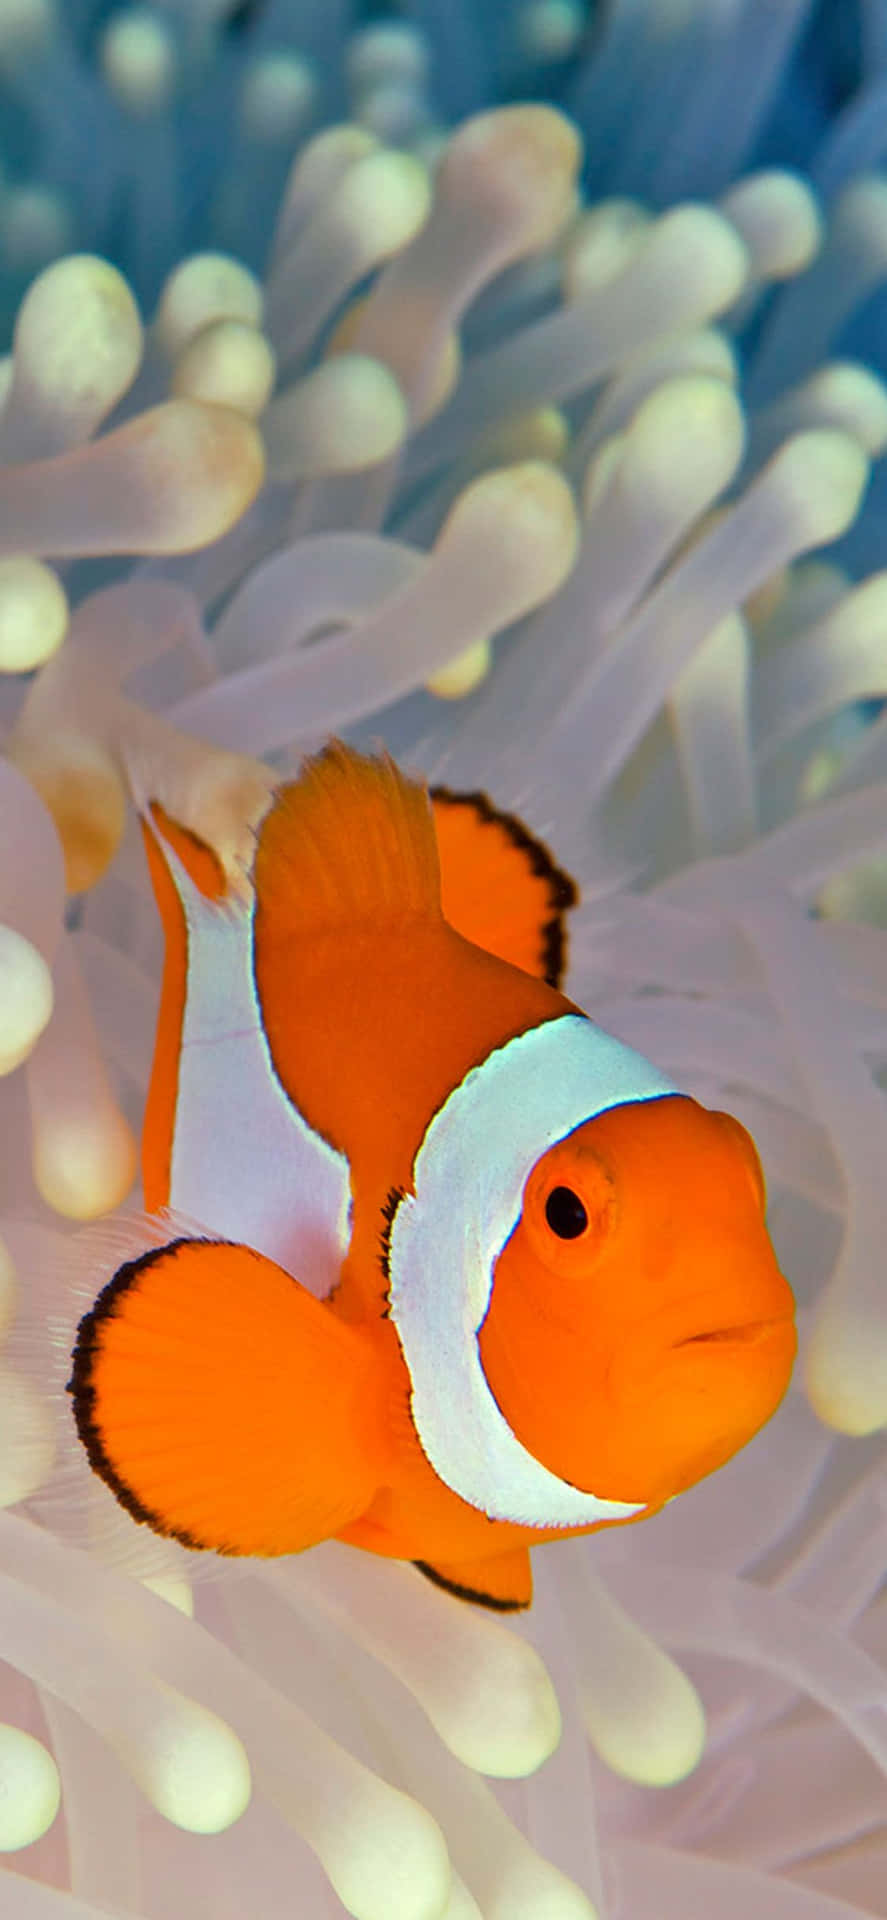 Bright and Colorful Clown Fish iPhone Wallpaper Wallpaper